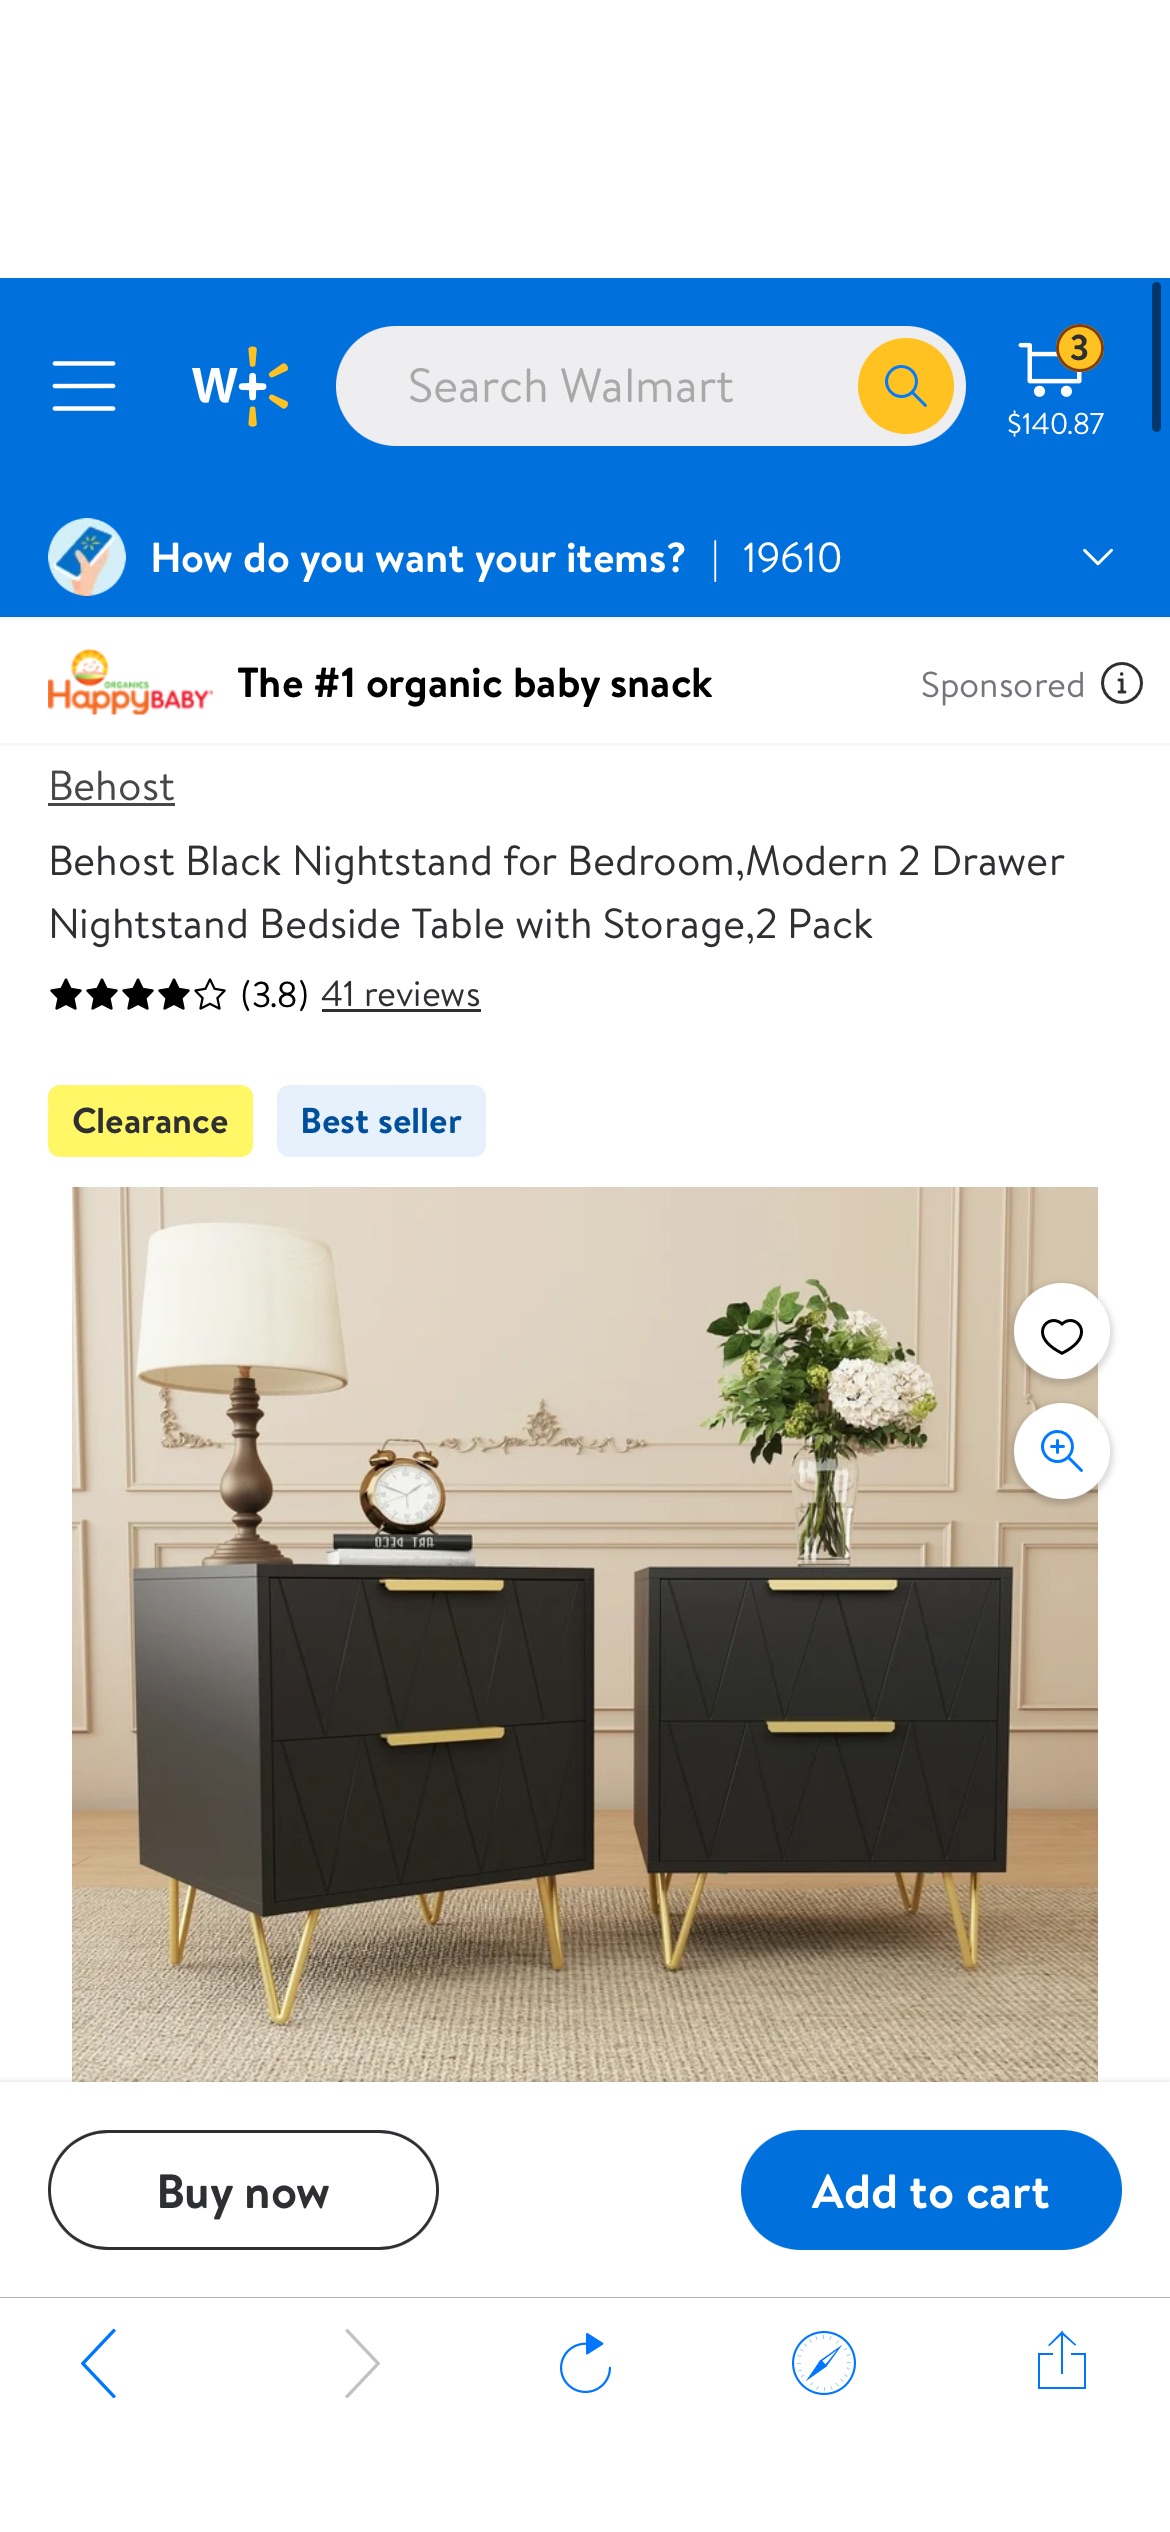 Behost Black Nightstand for Bedroom,Modern 2 Drawer Nightstand Bedside Table with Storage,2 Pack - Walmart.com